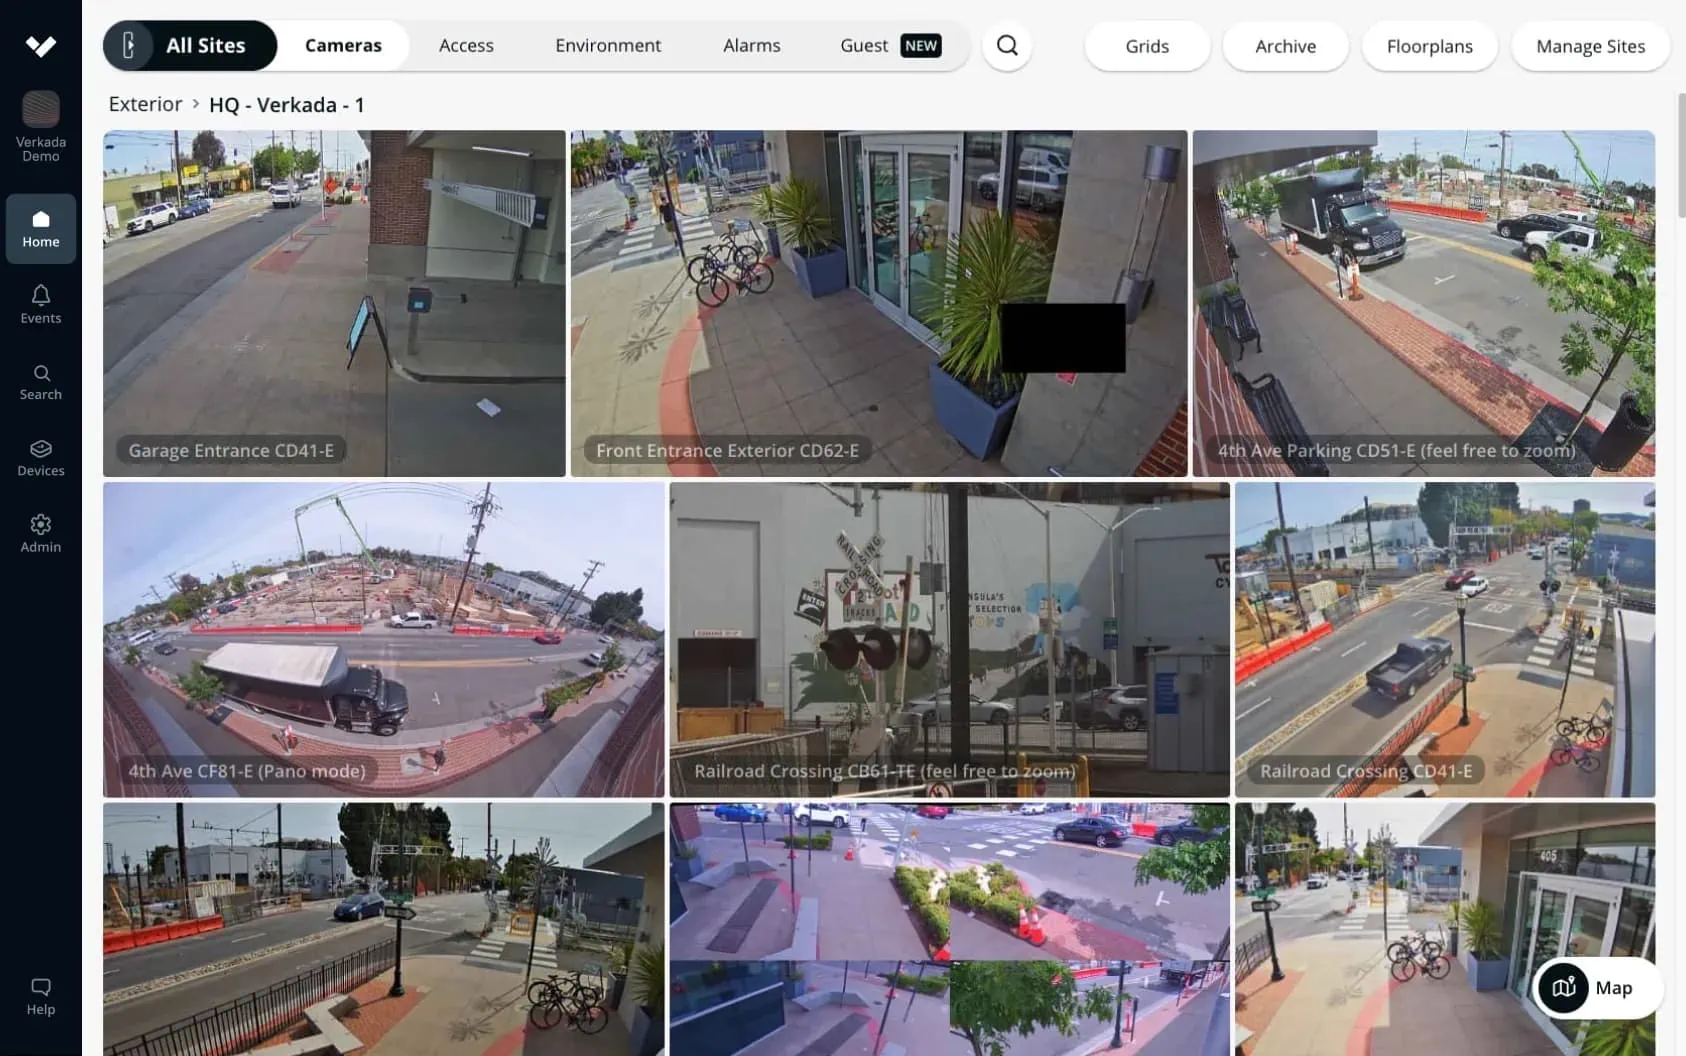 Command platform displaying footage from the security cameras of a New Orleans’ business